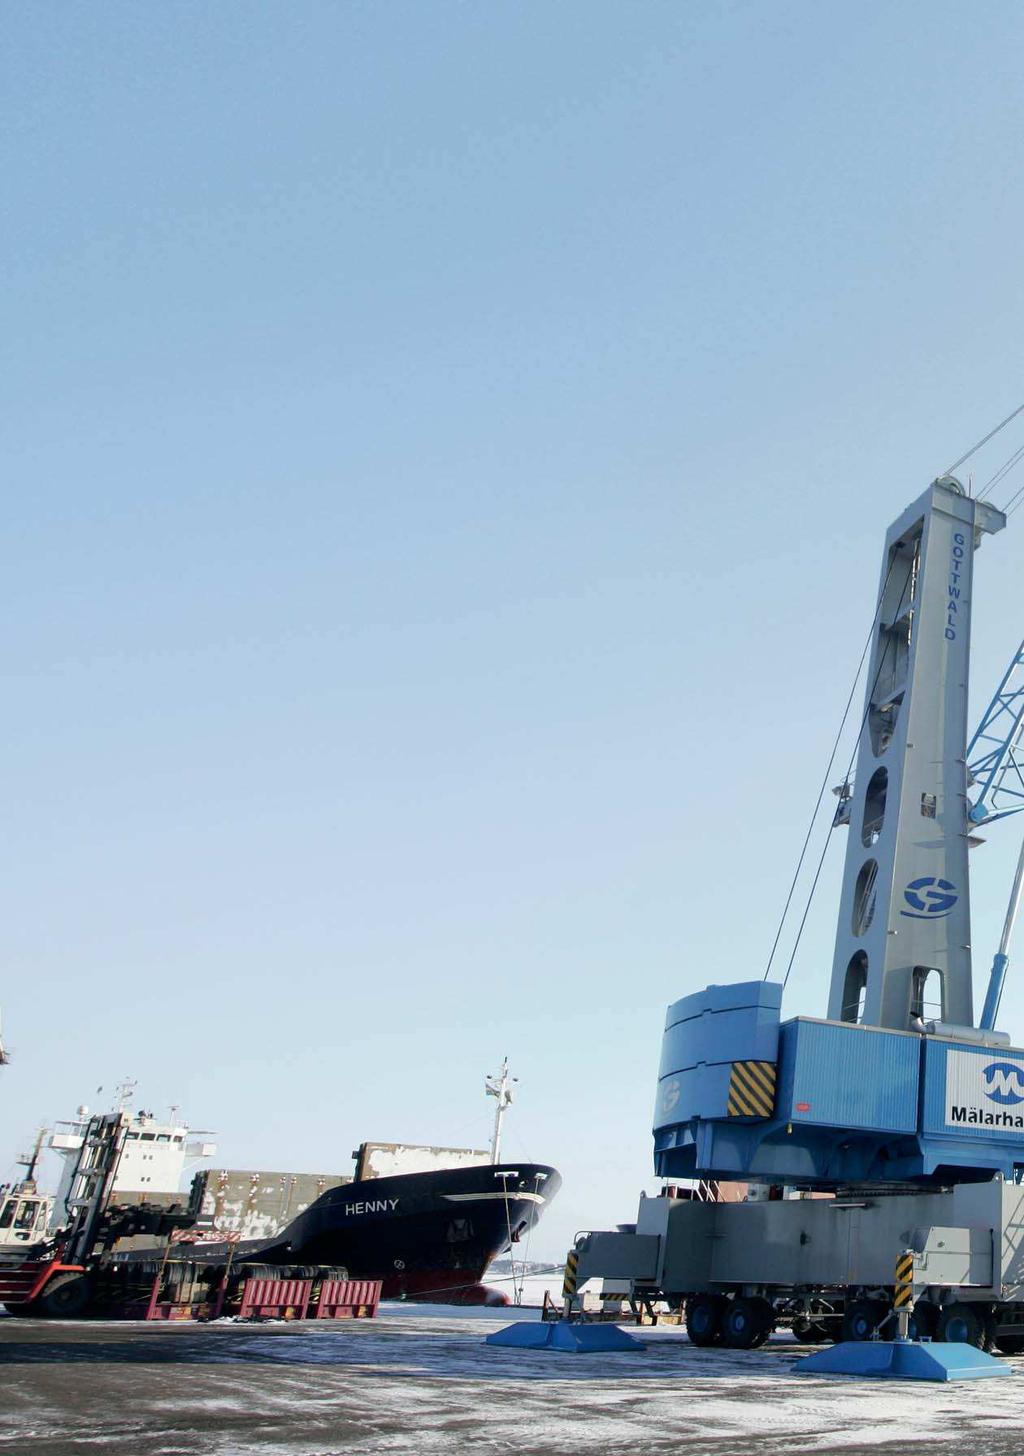 HMK 260 E Mobile Harbour Crane Meeting Customer Requirements As 4-rope grab cranes with a second hoist, Mobile Harbour Cranes are particularly suited to professional continuous-duty handling of bulk